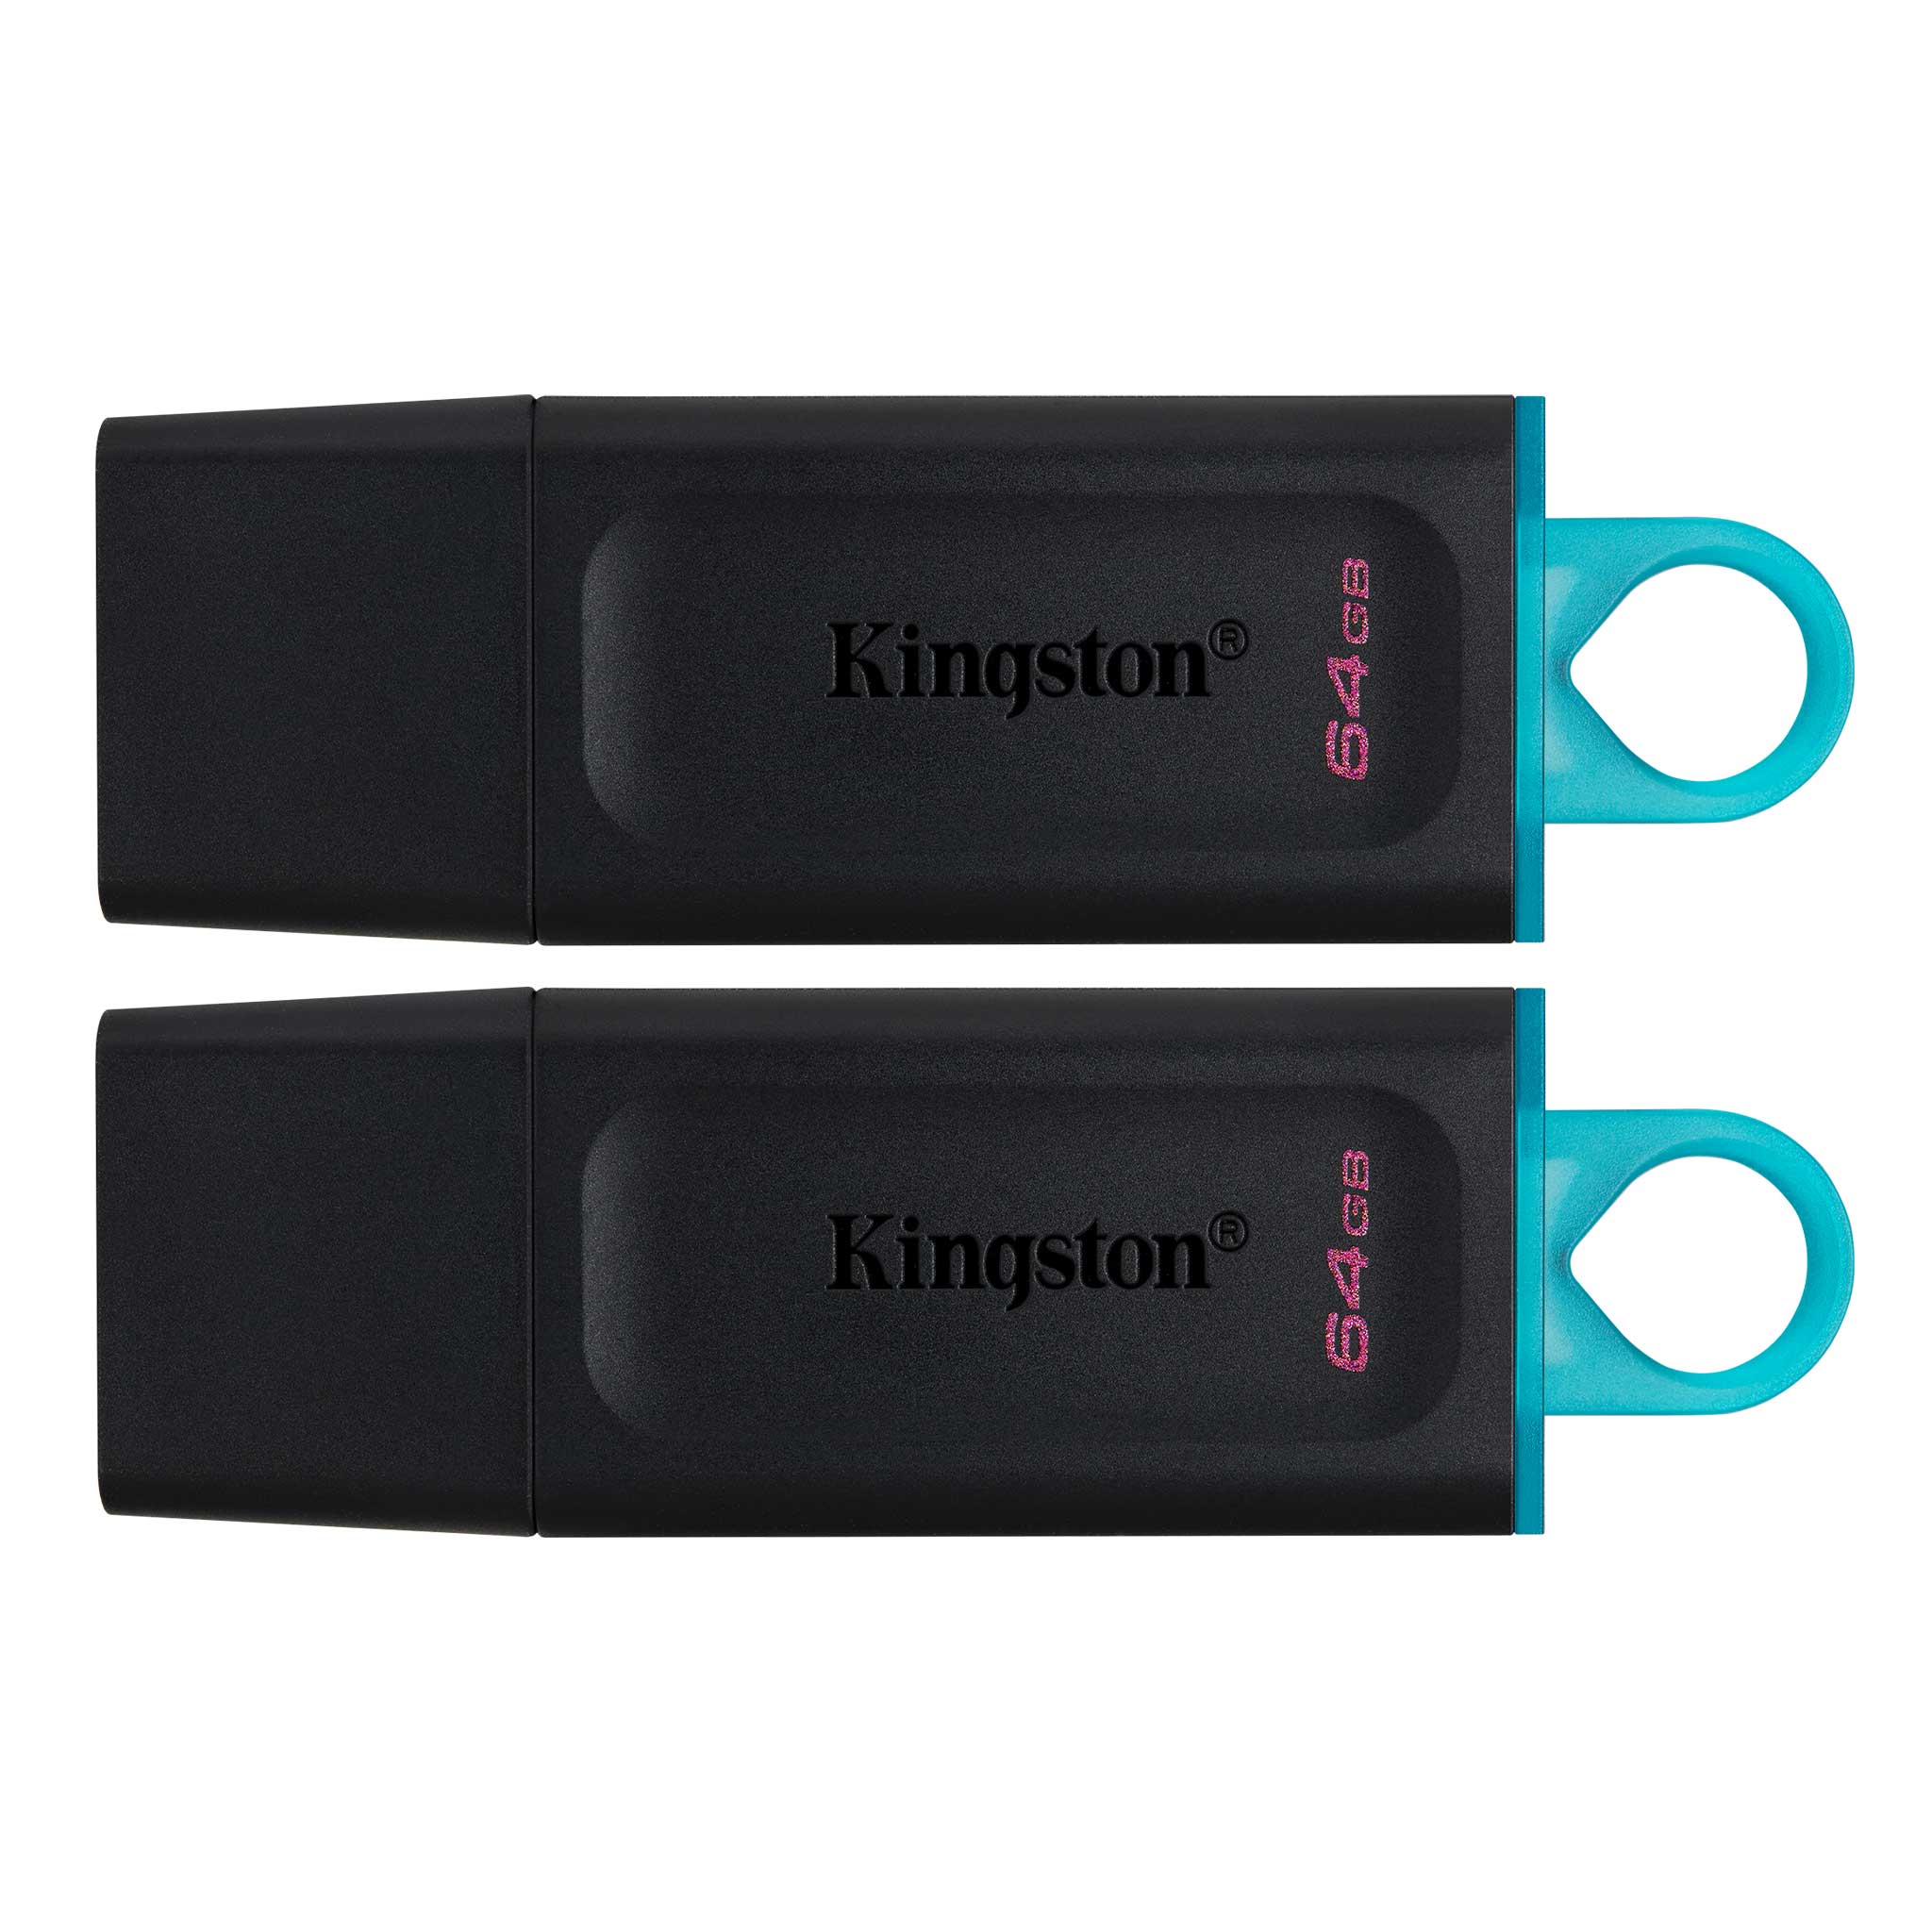 deal with except for Quite DataTraveler Exodia - USB 3.2 Flash Drive - Kingston Technology